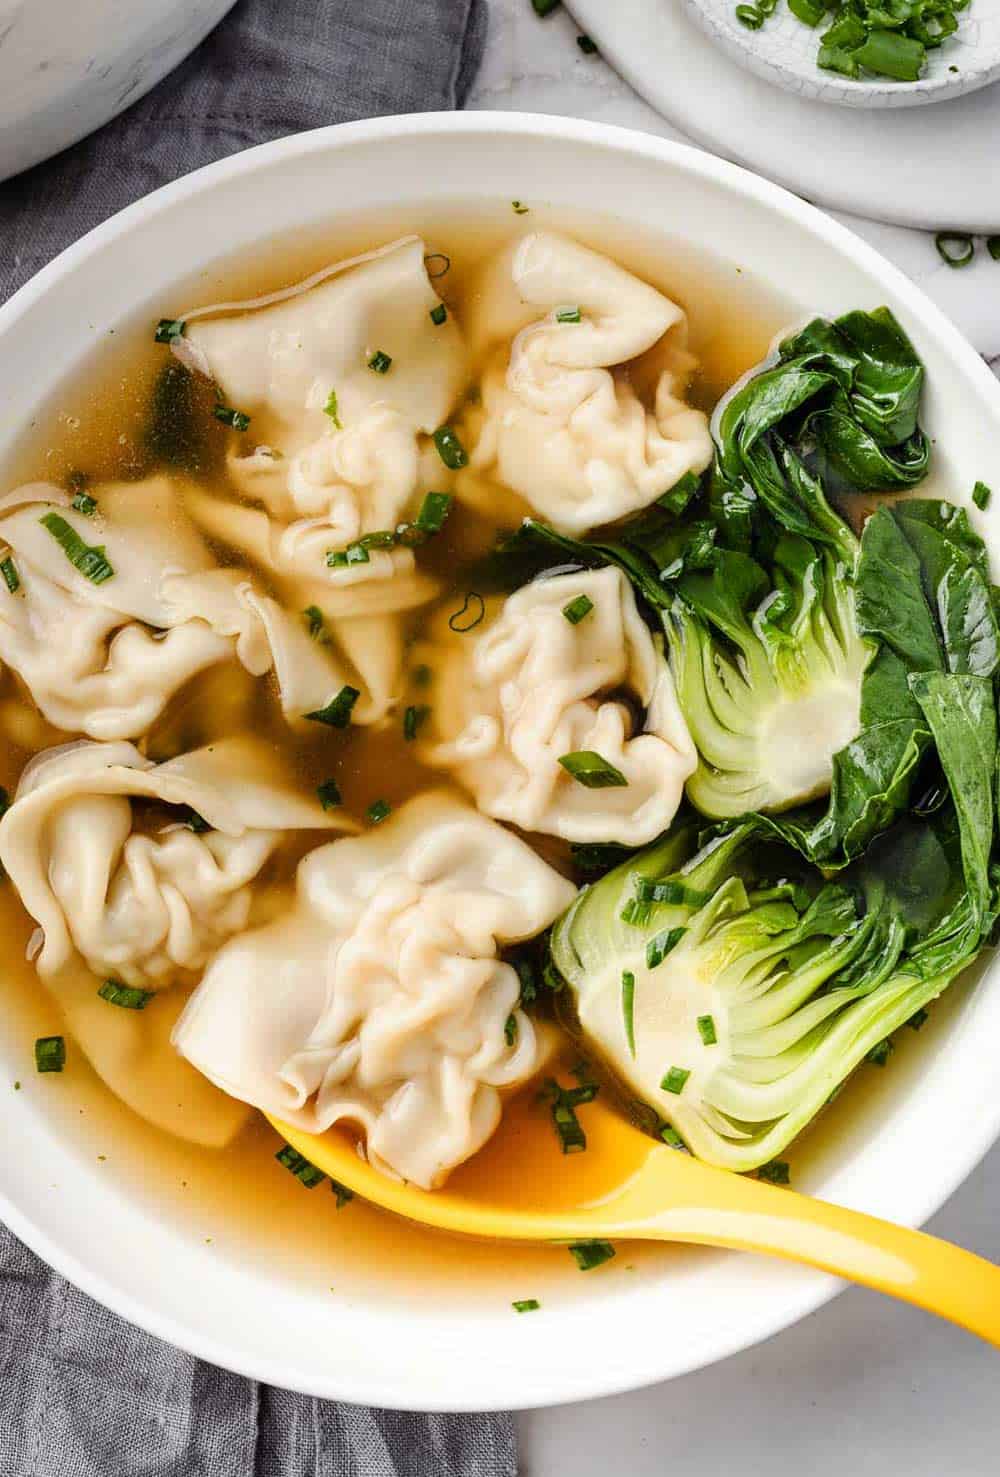 Overhead image of Wonton Soup in a white bowl, featuring plump wontons and fresh bok choy in a clear, flavorful broth.